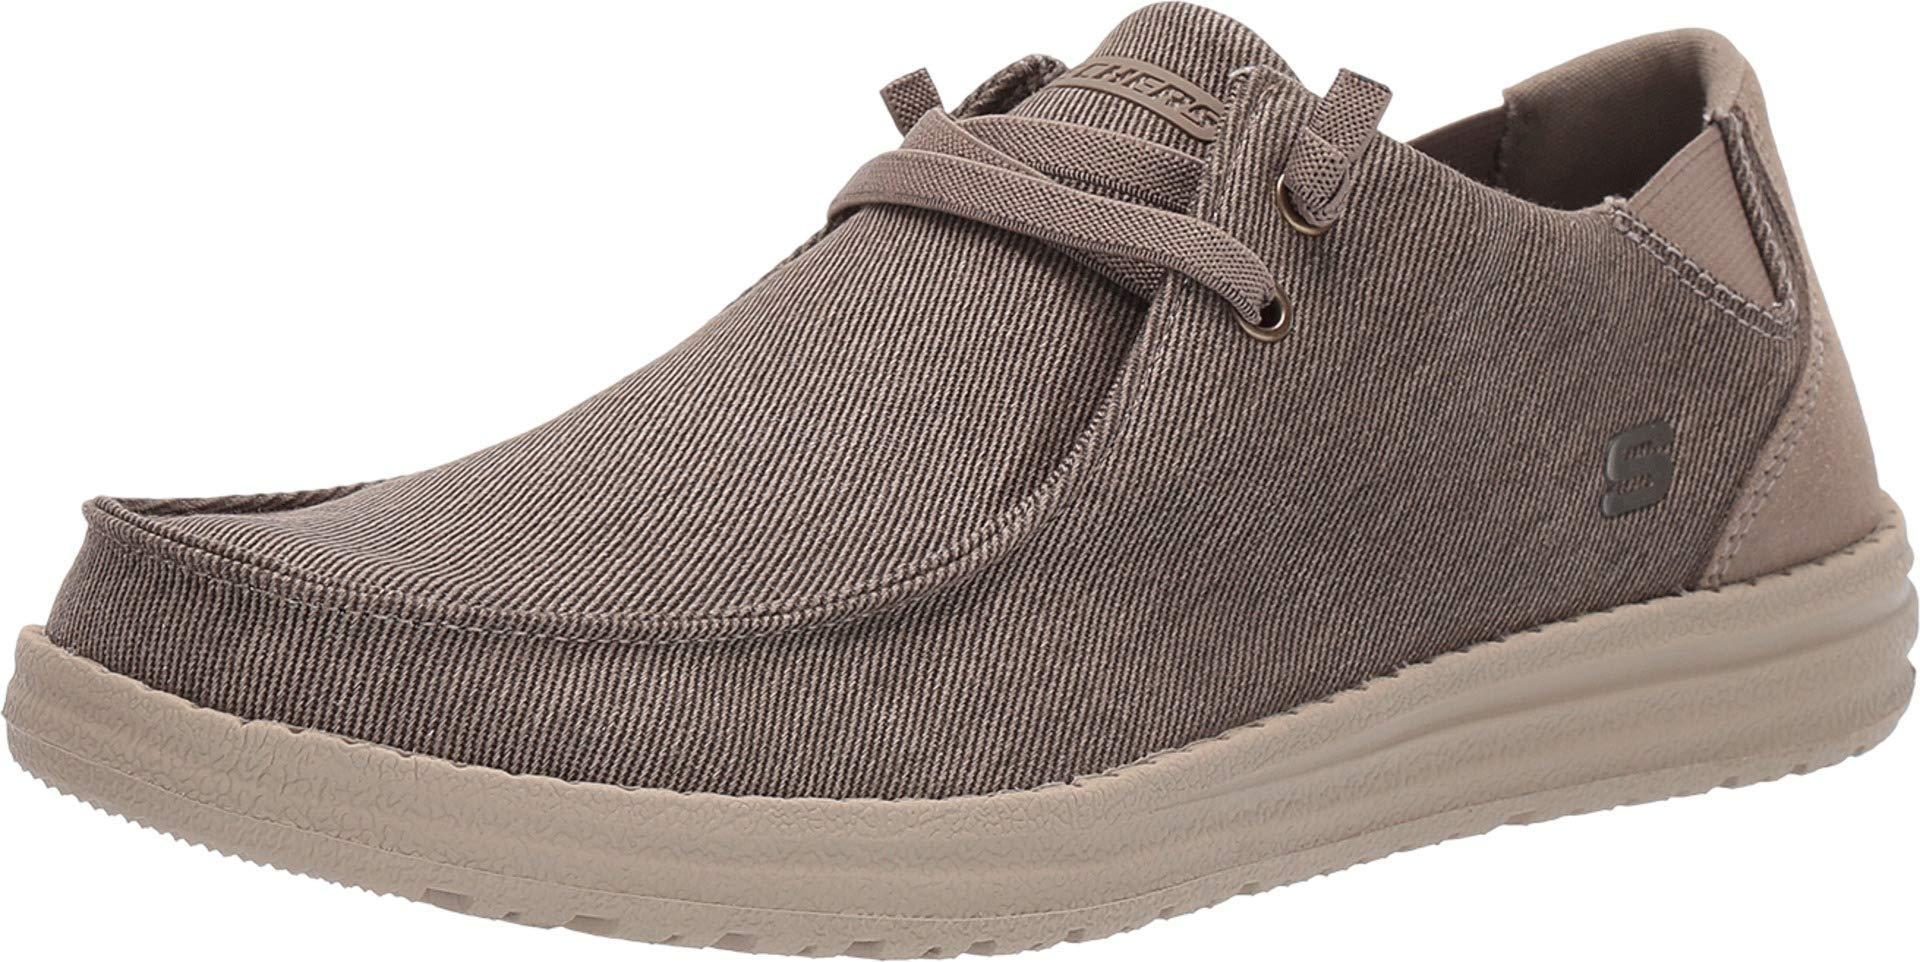 Skechers Melson Raymon in Brown for Men - Save 20% - Lyst